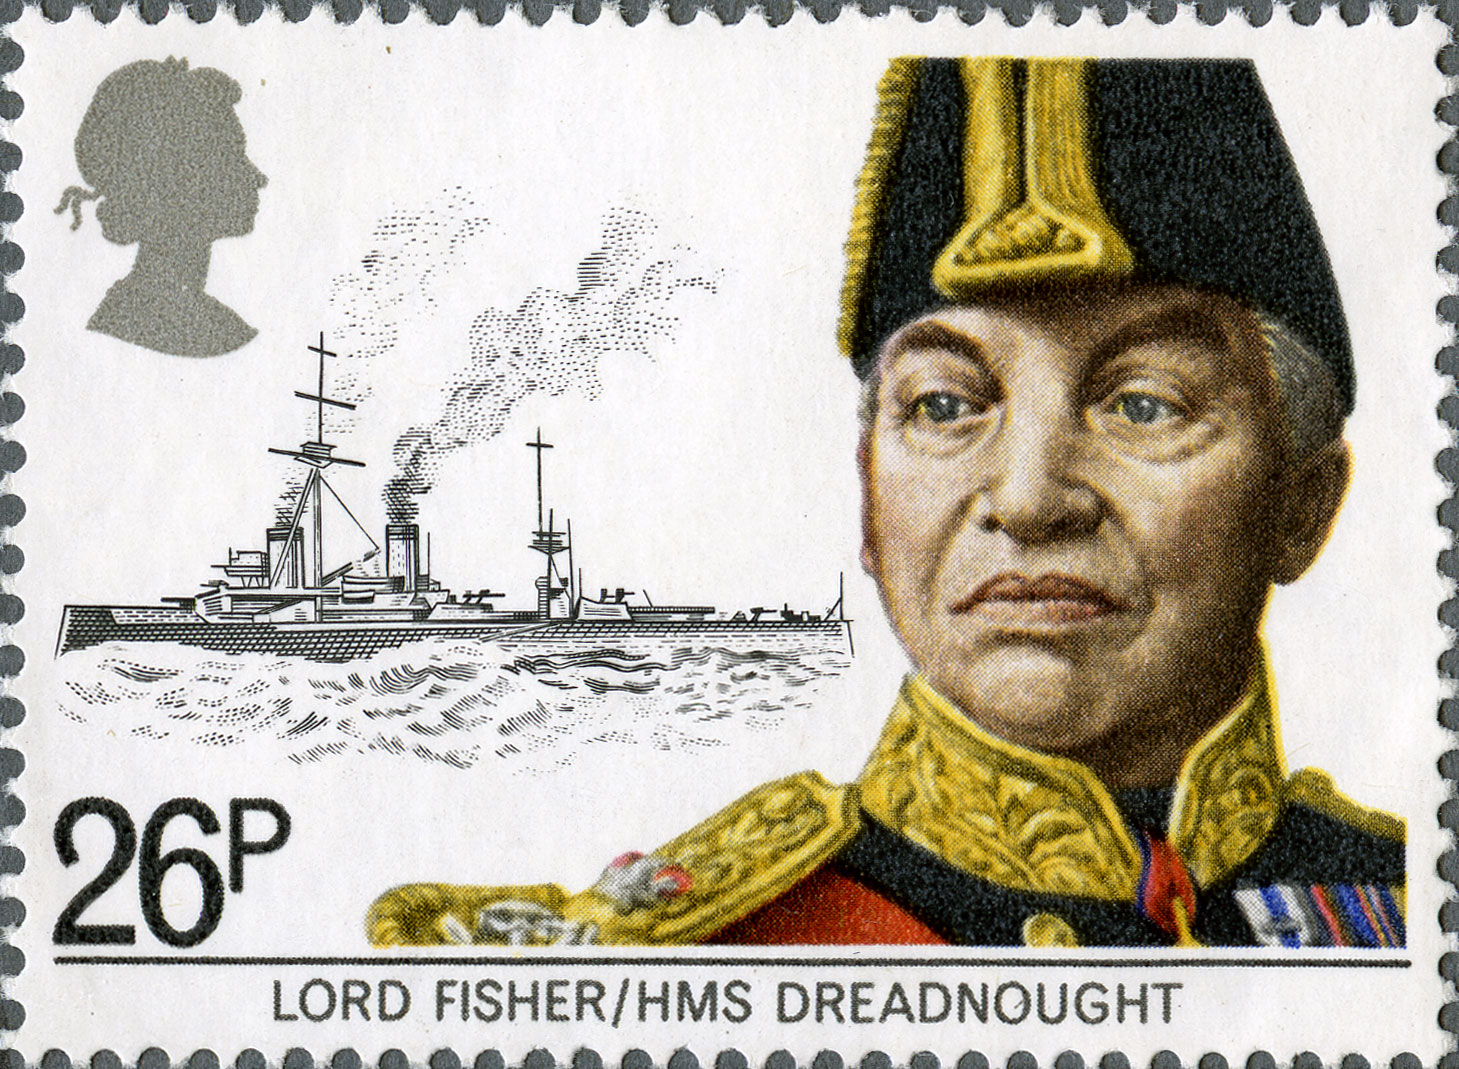 26p, Lord Fisher & HMS Dreadnought.